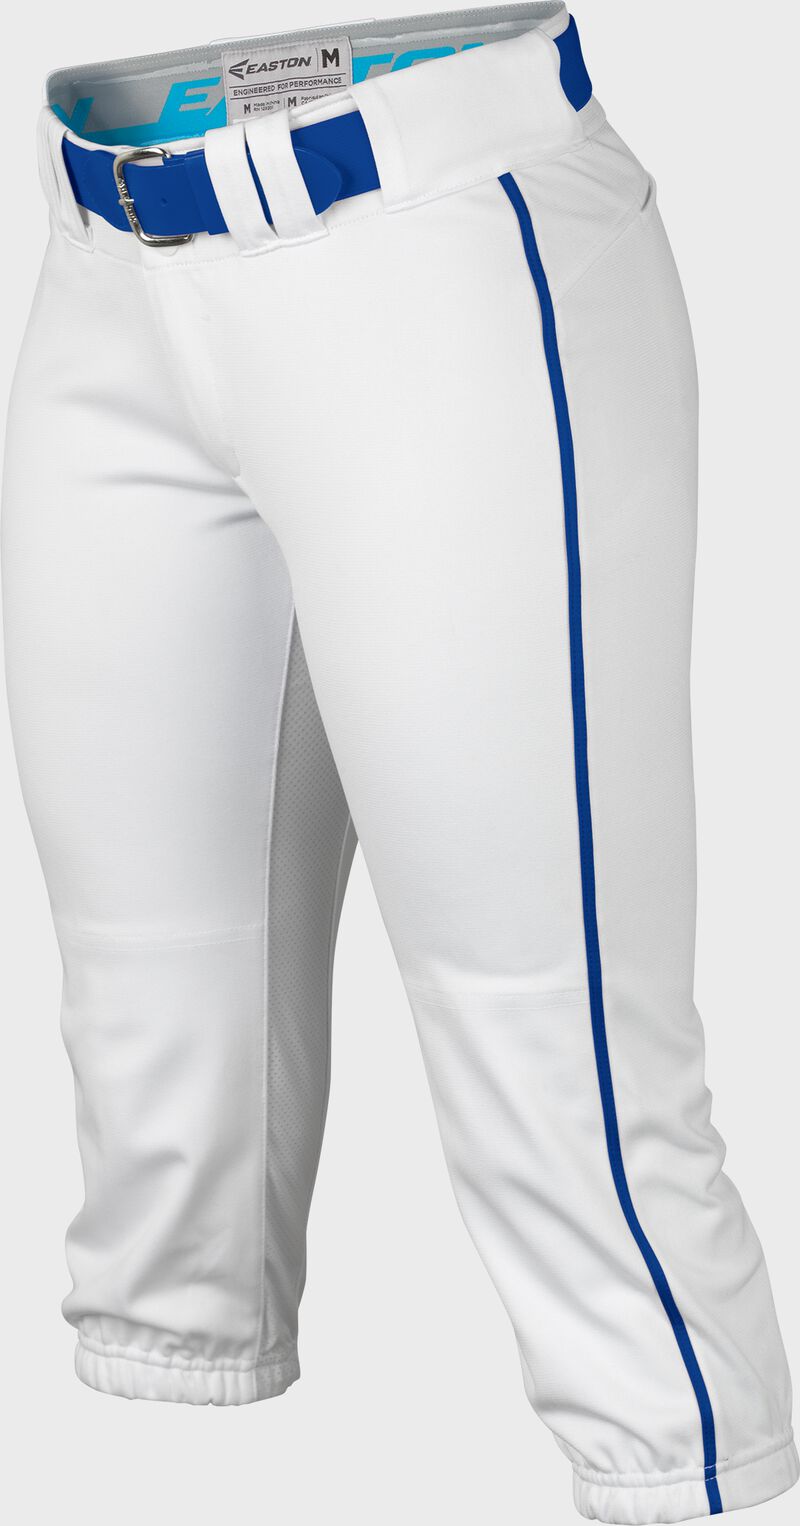 Easton Prowess Softball Pant Women's Piped WHITE/ROYAL  XS